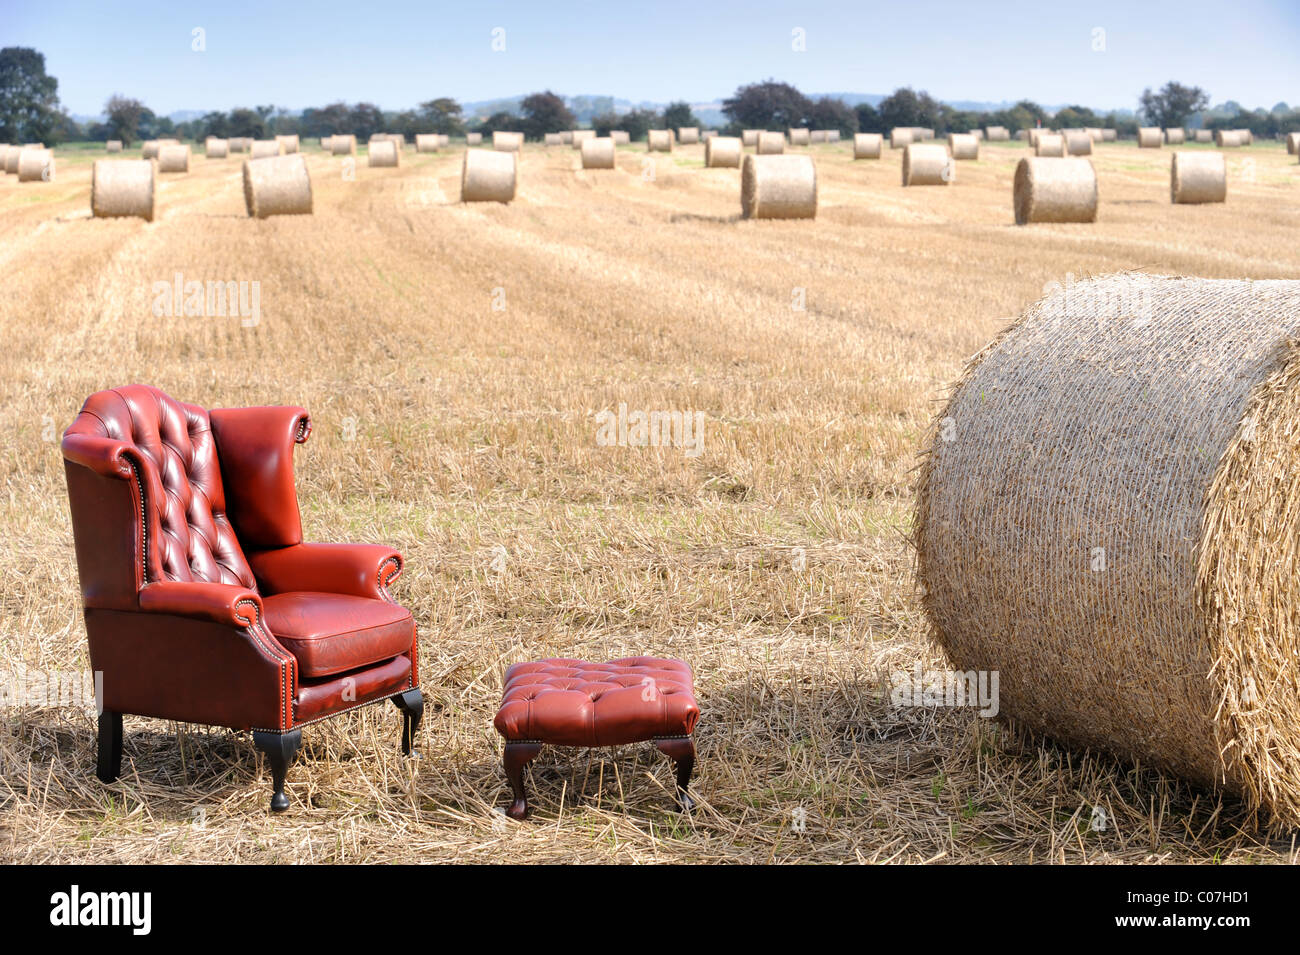 An antique red leather armchair in a field of harvested hay UK Stock Photo